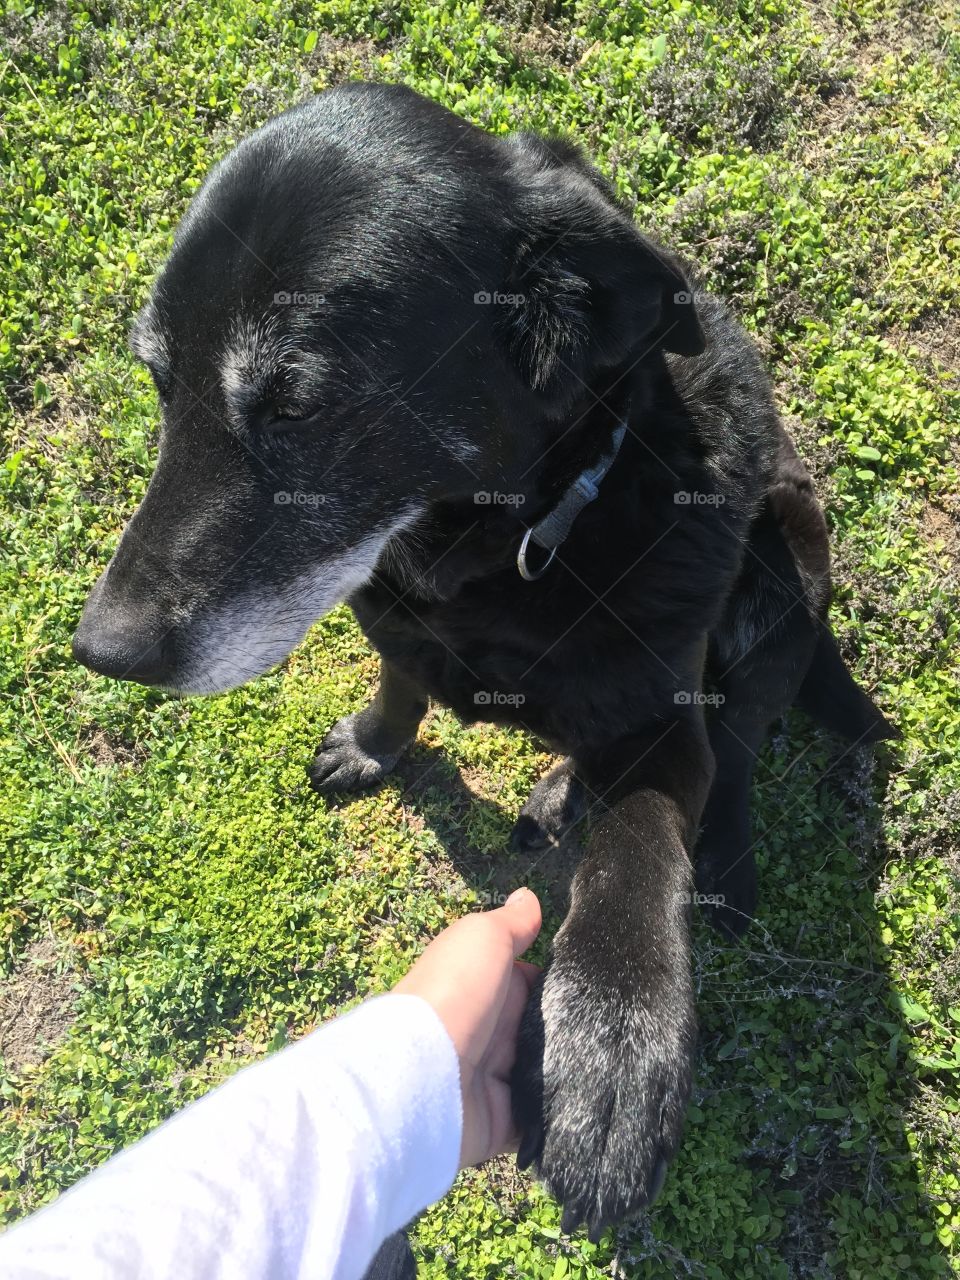 Friendly dog, always wanting to hold hands. 